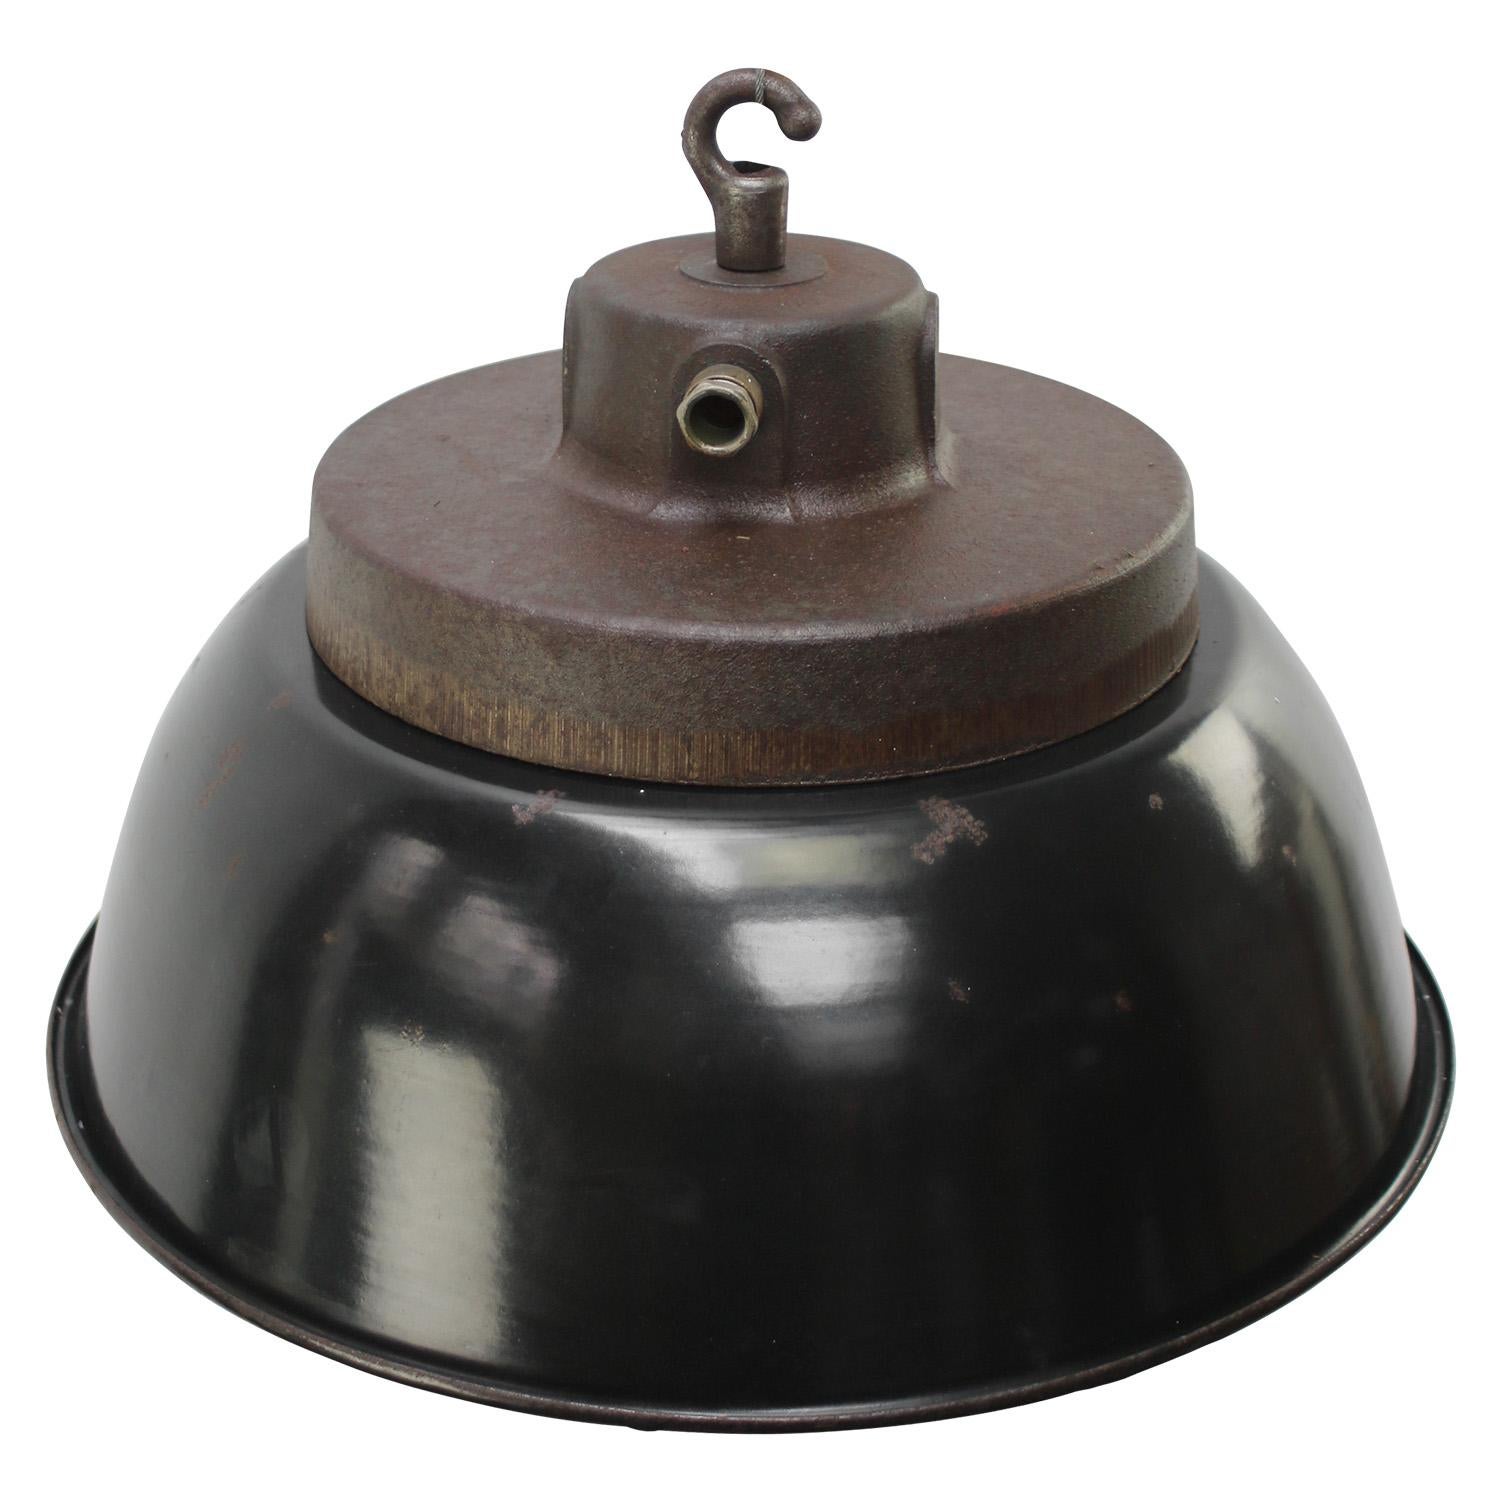 Factory hanging lamp
black enamel white interior
cast iron top

Weight 5.60 kg / 12.3 lb

Priced per individual item. All lamps have been made suitable by international standards for incandescent light bulbs, energy-efficient and LED bulbs. E26/E27